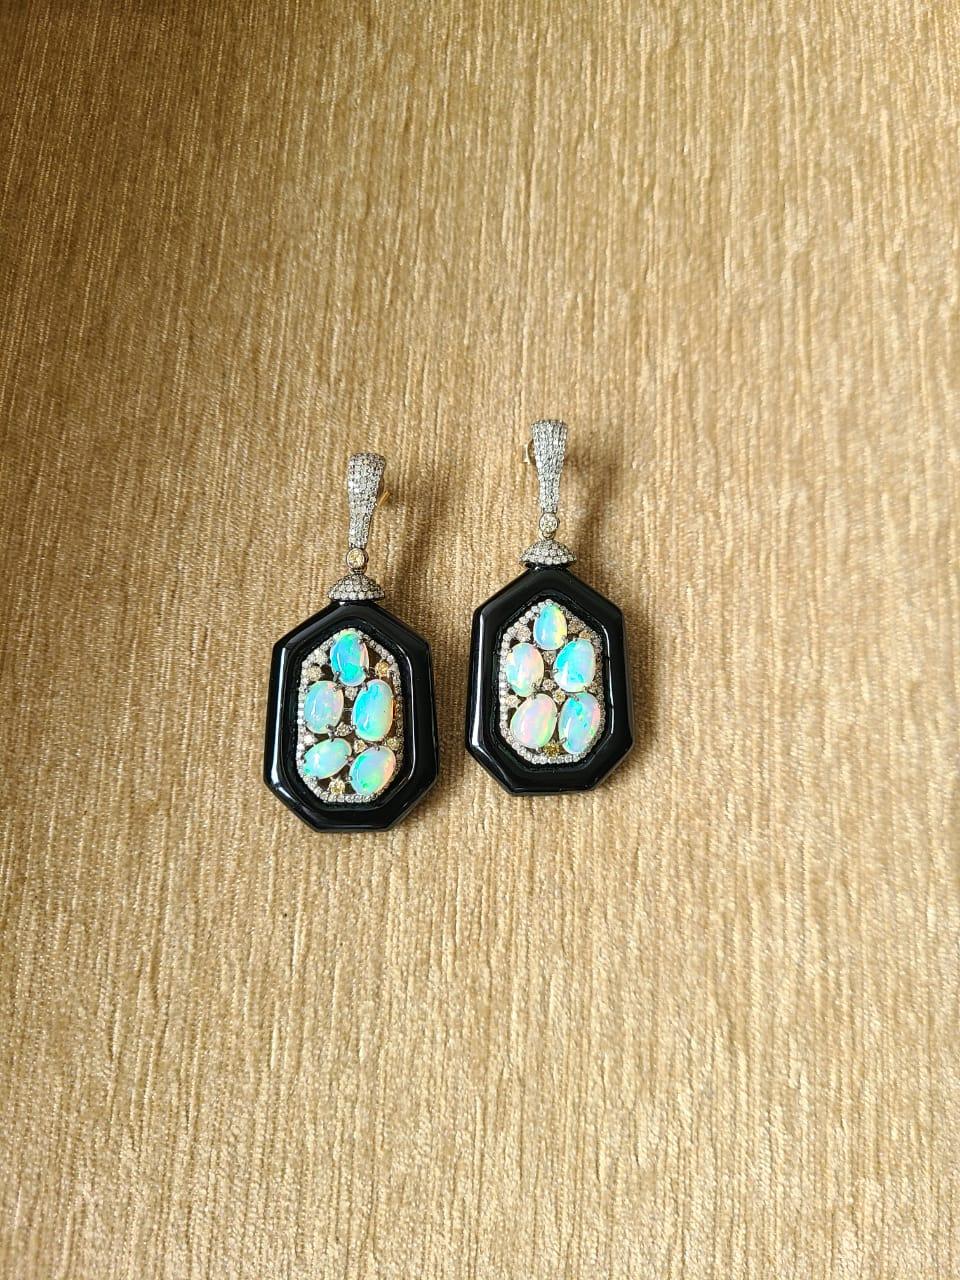 A very gorgeous Opal and Black Onyx Dangle Earrings set in 14K Gold & Diamonds. The Opals are of Ethiopian origin and weigh 8.10 carats. The weight of the Black Onyx is 43.18 carats. The weight of the Diamonds is 2.12 carats. The dimensions of the